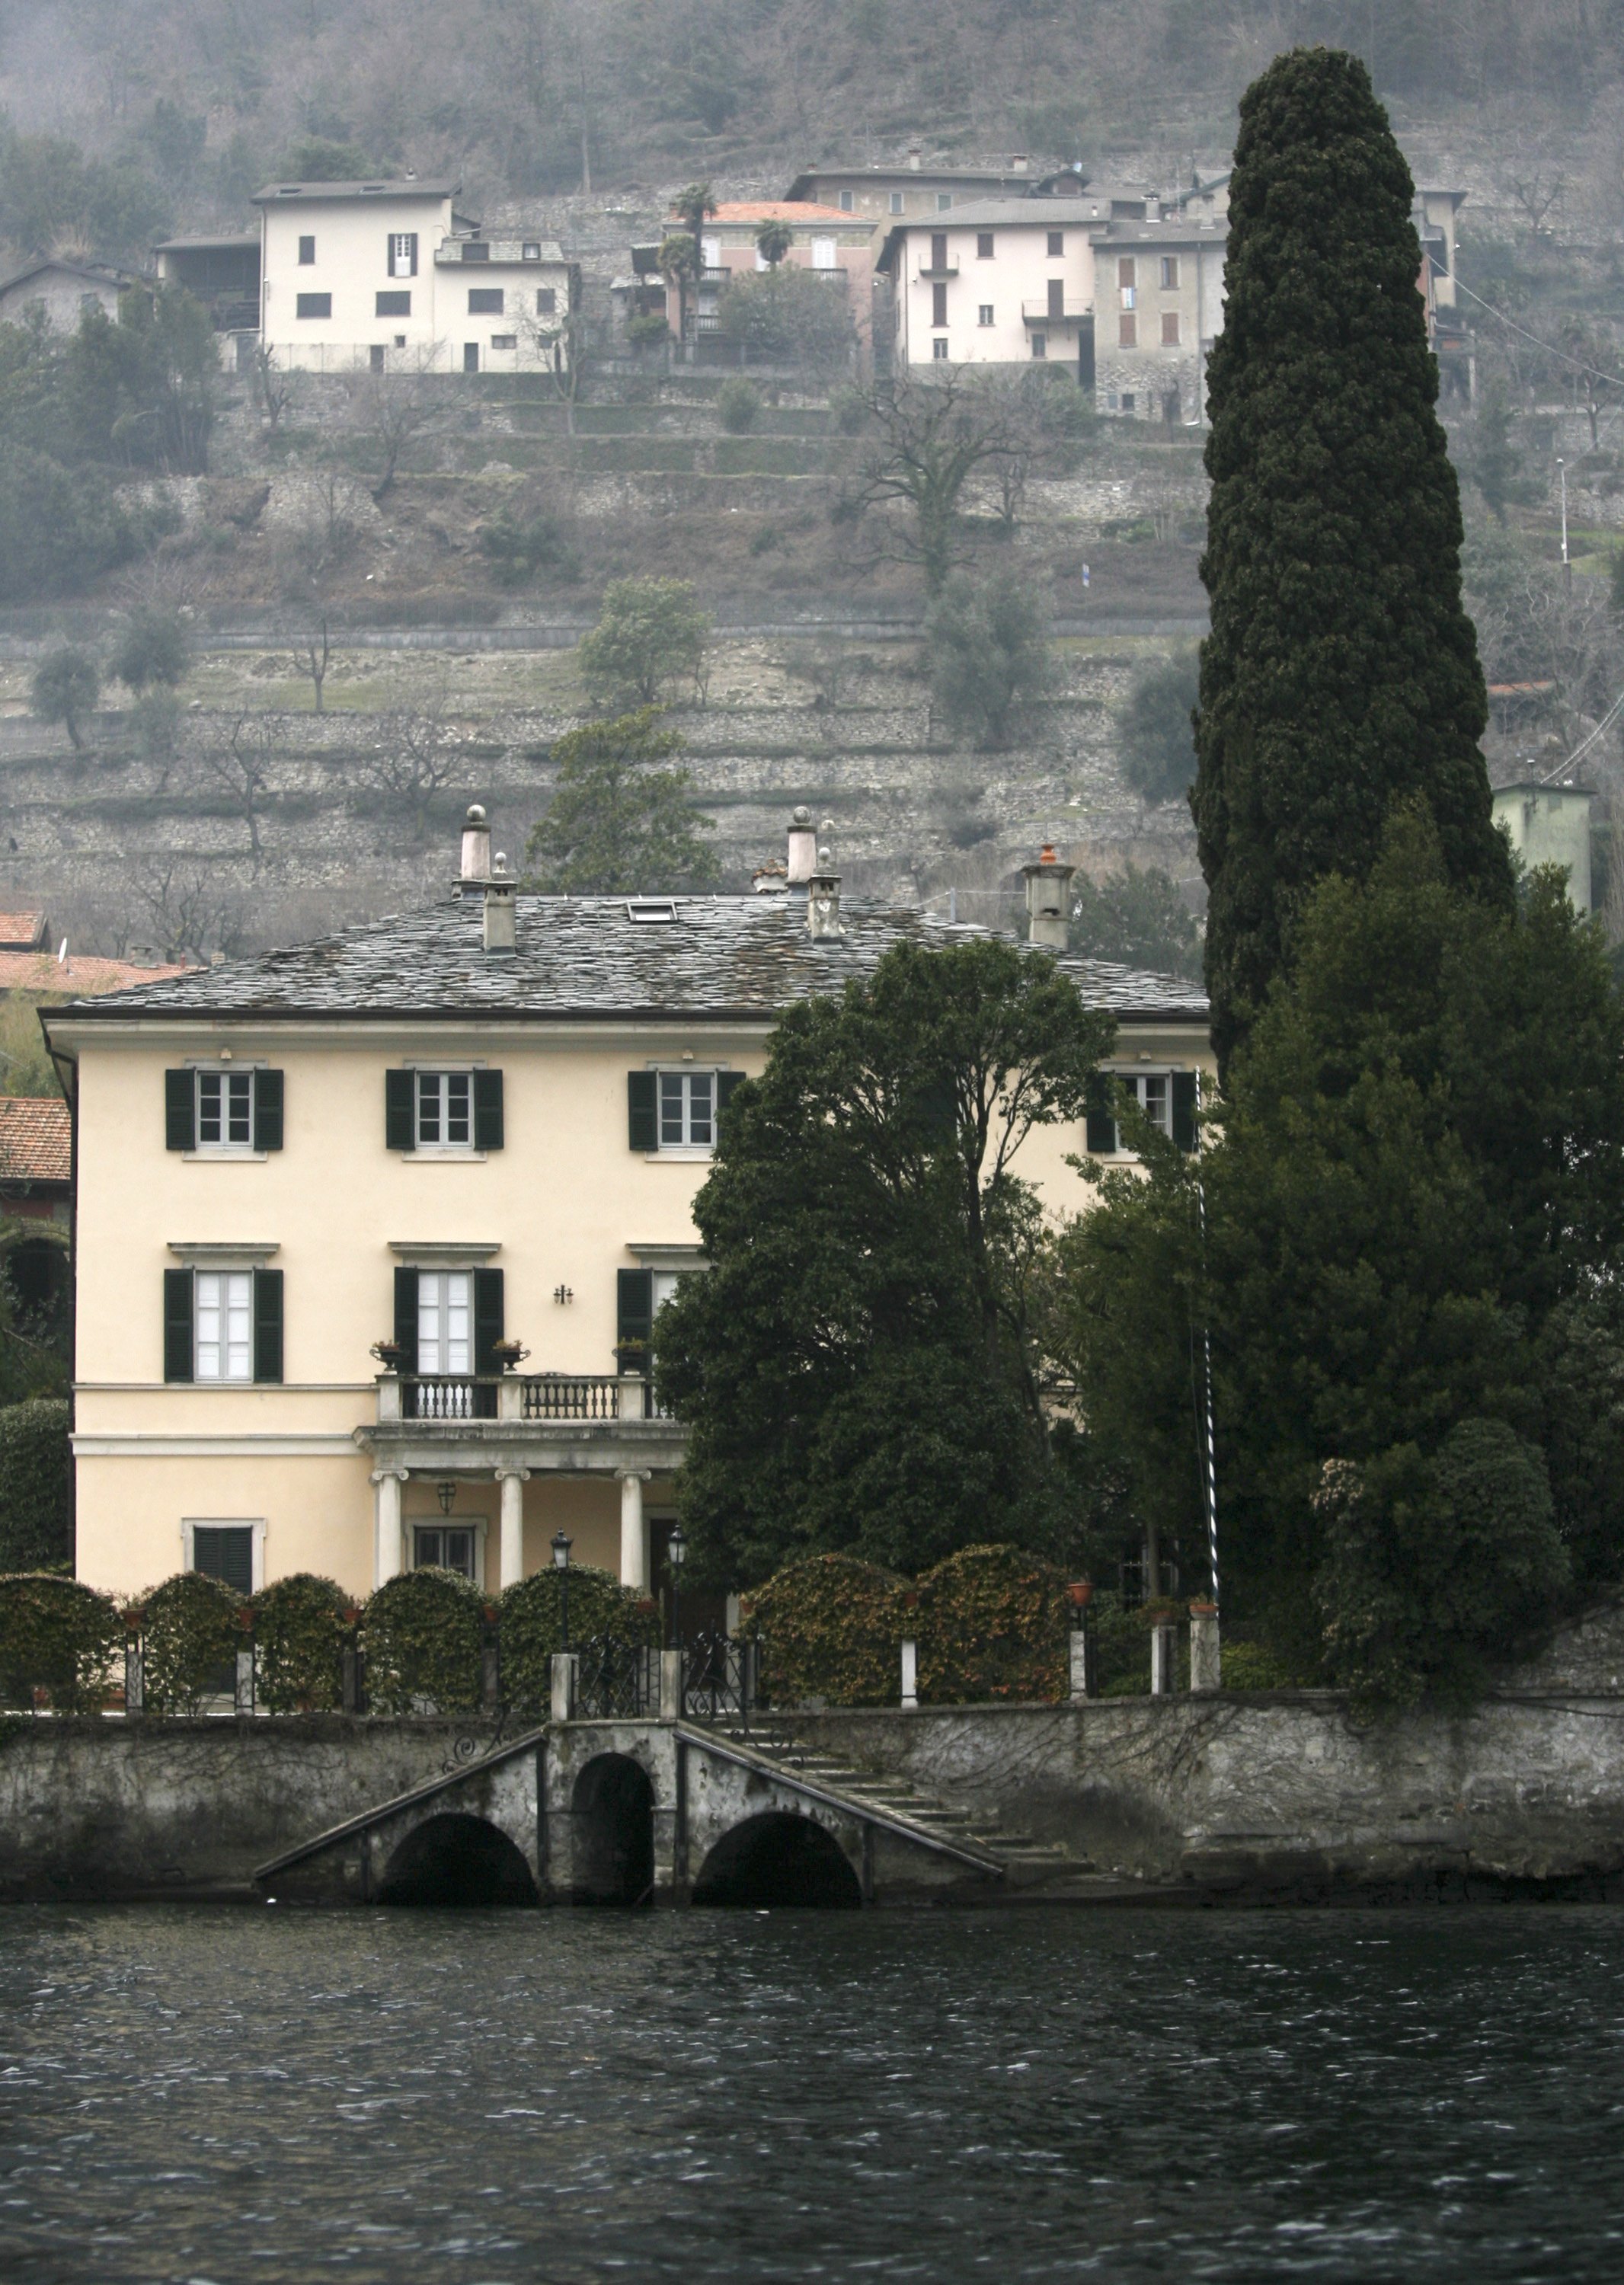 Villa Oleandra, owned by George Clooney, March 18, 2006 in Como, Italy. | Source: Getty Images